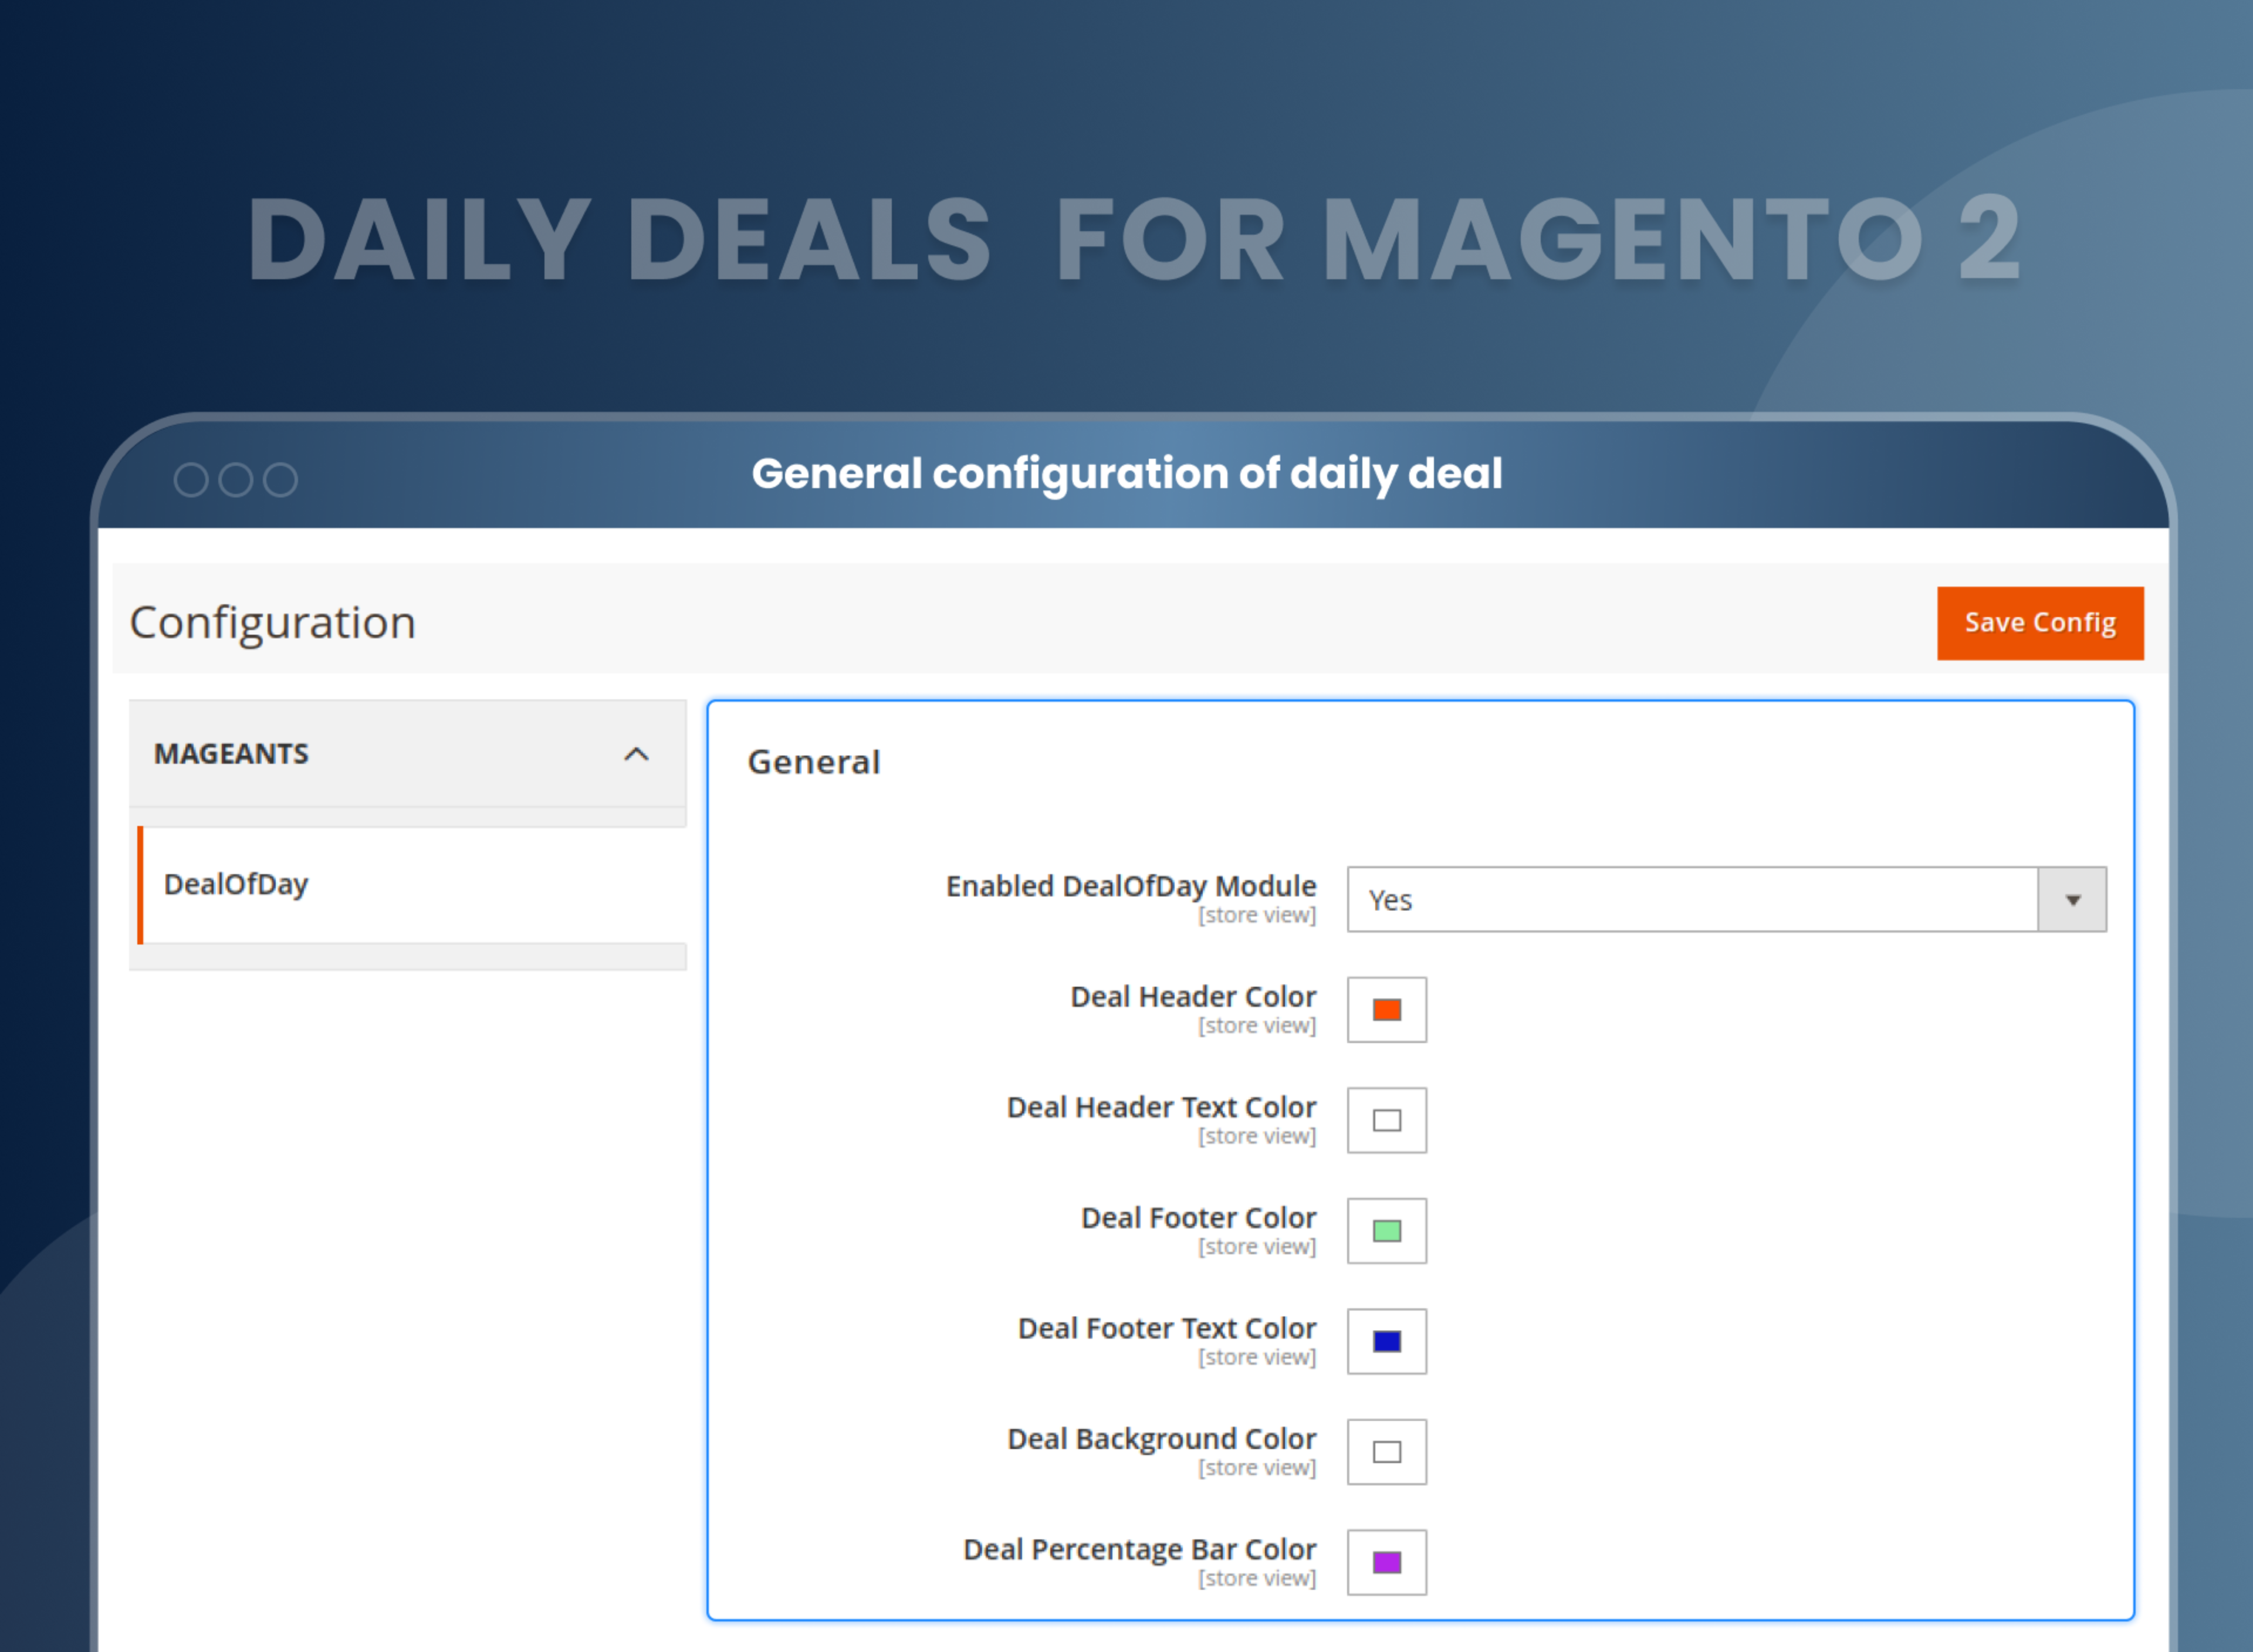 General configuration of daily deal